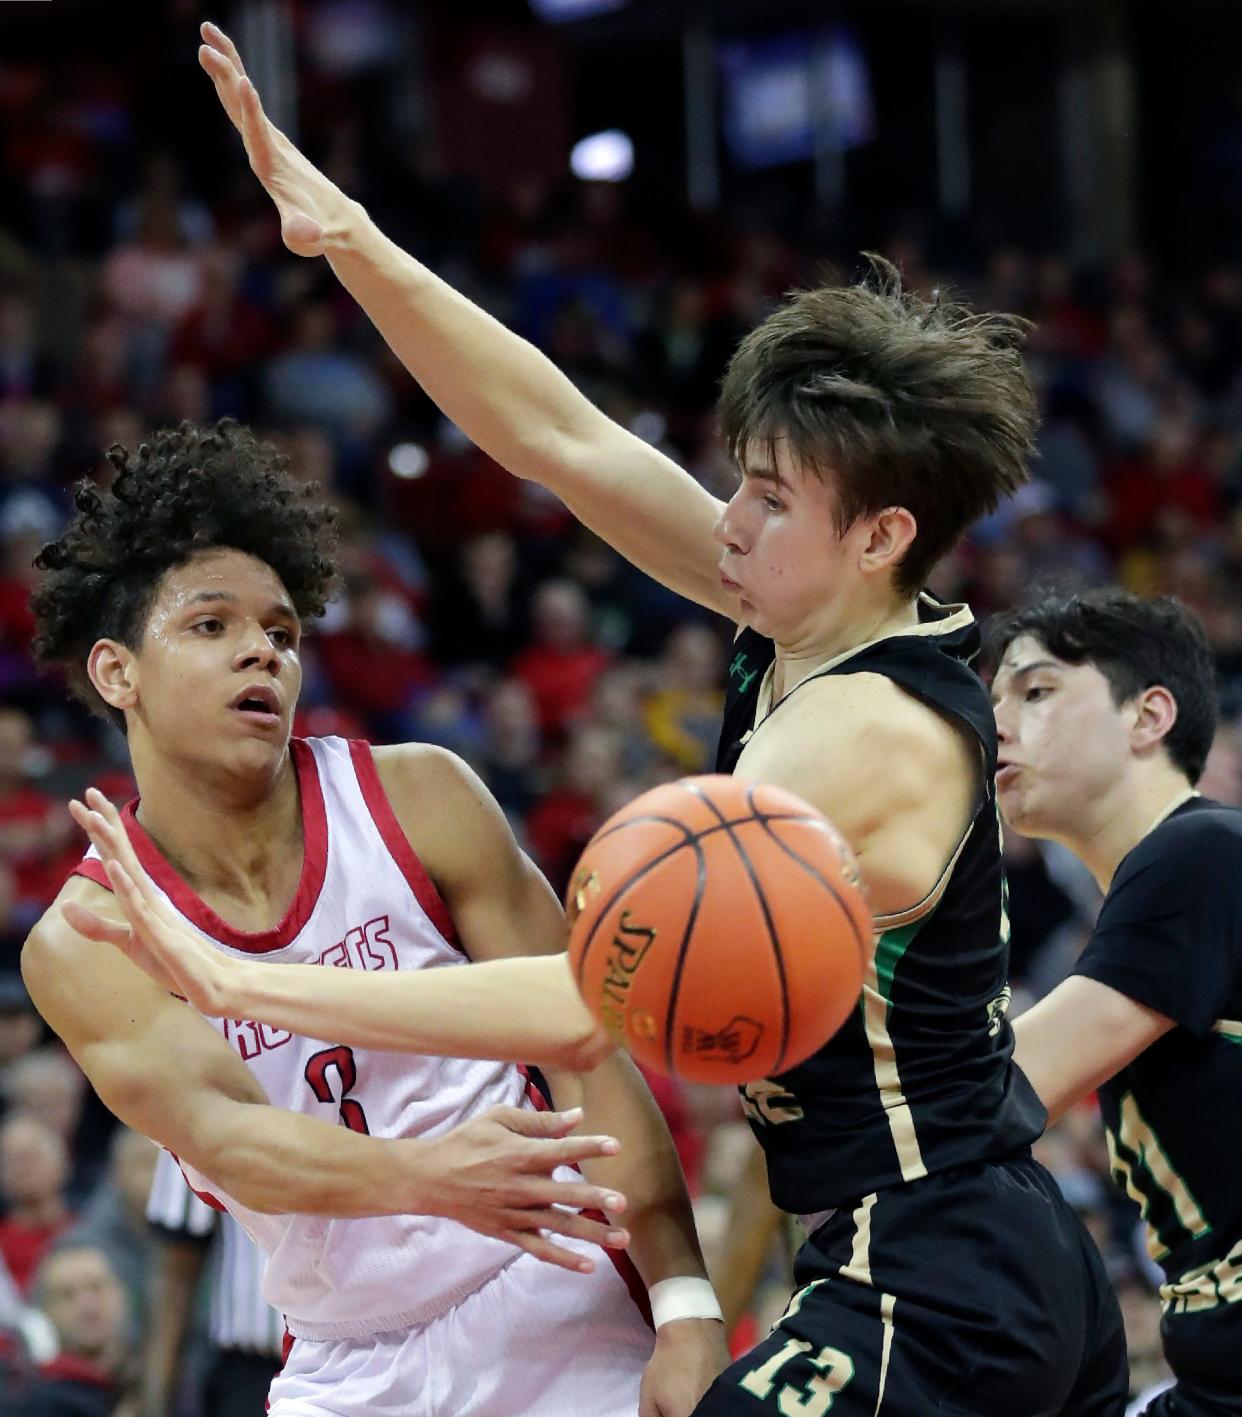 Chevalier Emery Jr. (3) helped lead Neenah to the WIAA Division 1 state title in 2022.